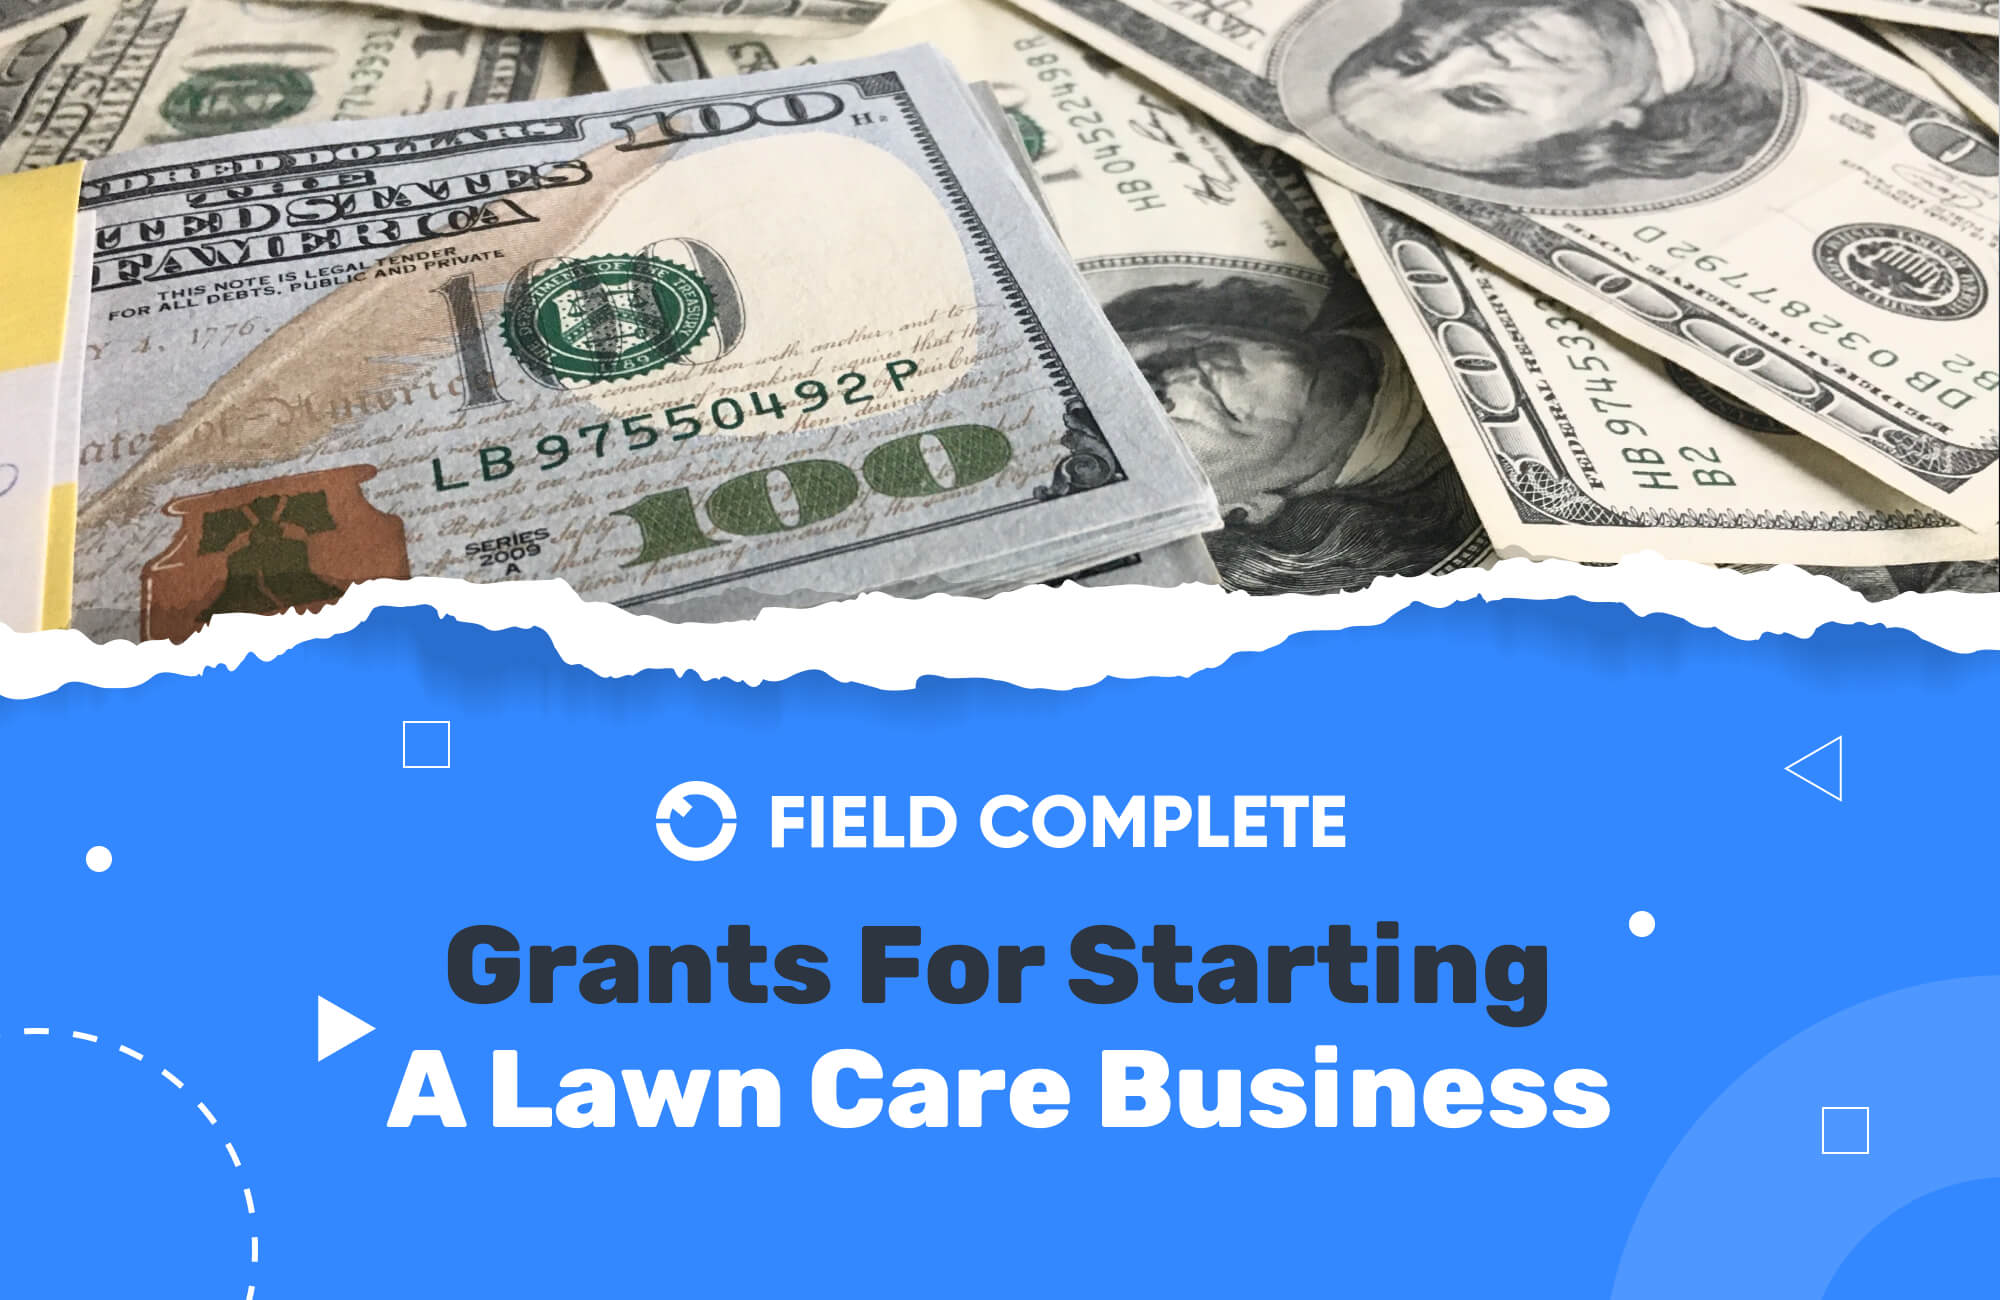 Grants For Starting A Lawn Care Business